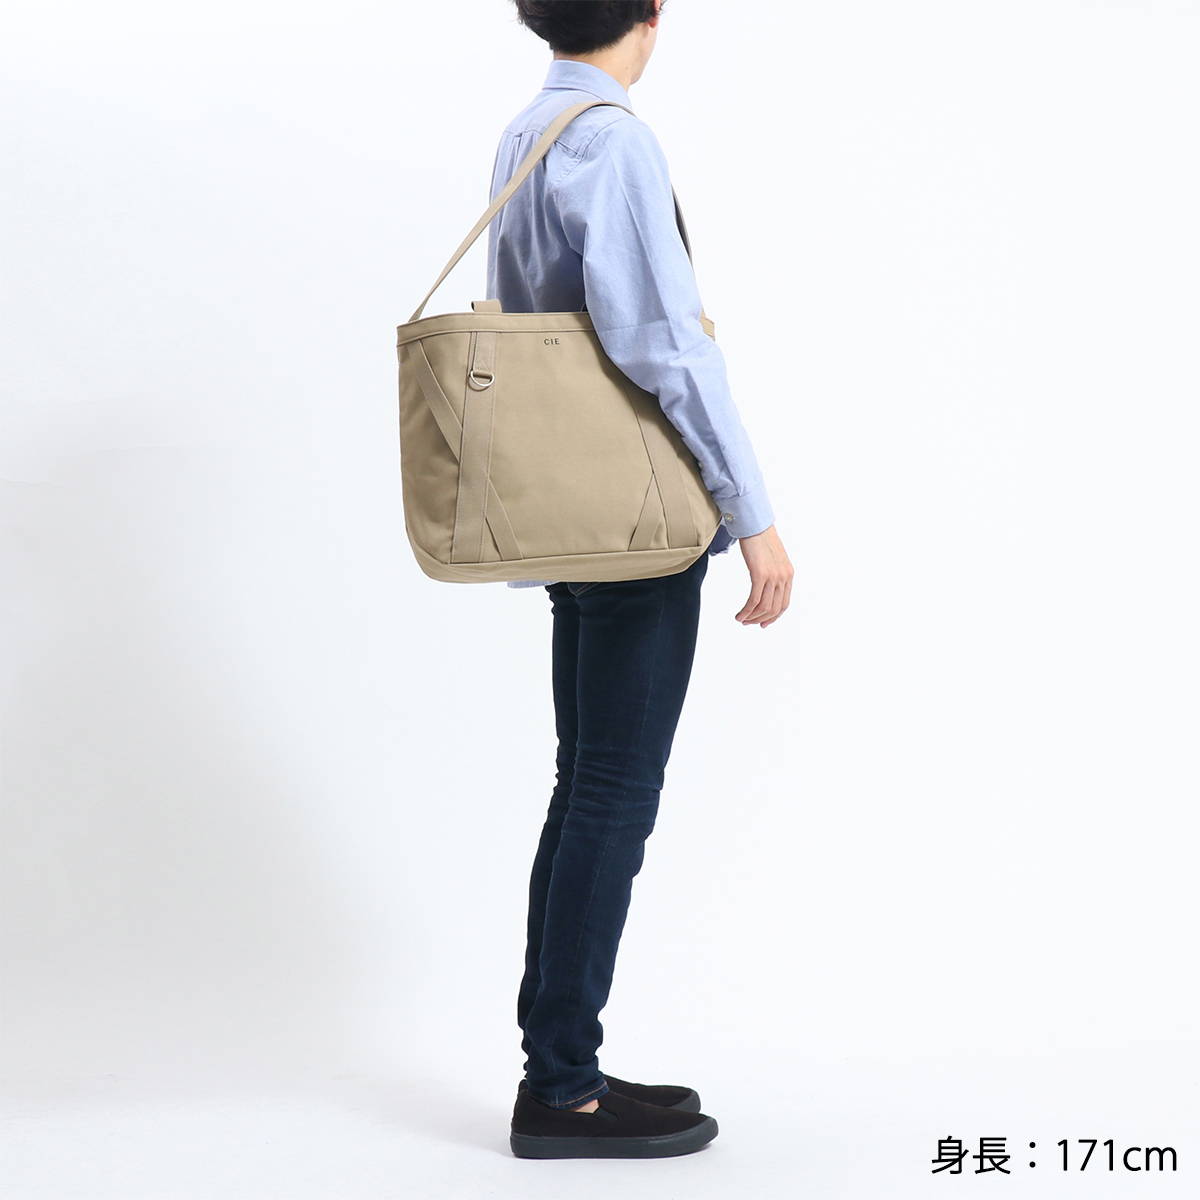 CIE シー DUCK CANVAS TOTE-L 2WAY トートバッグ 041800 